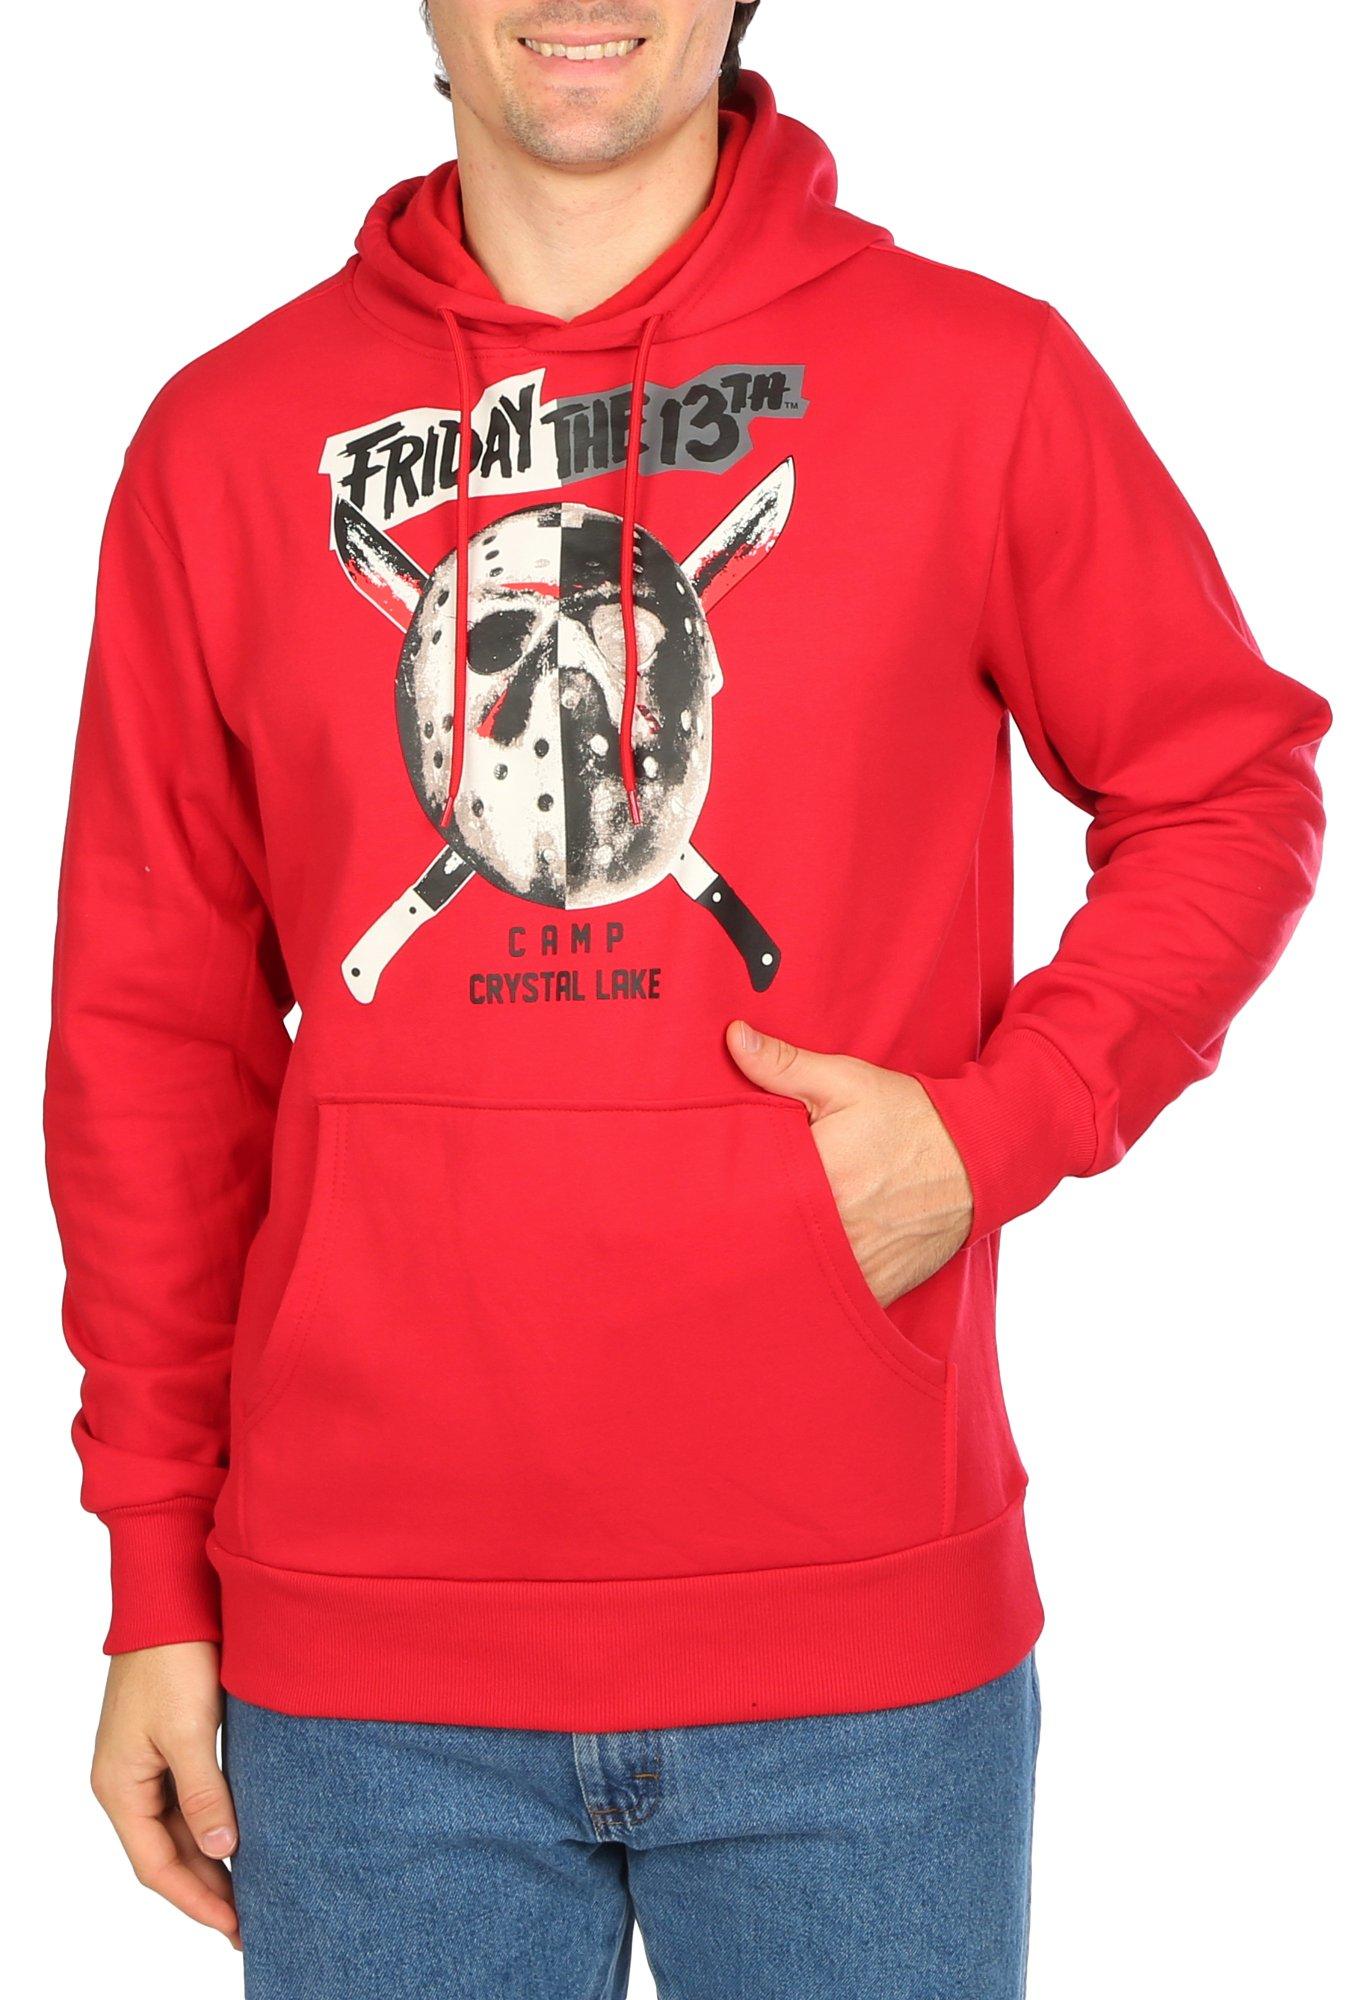 Men's Friday The 13th Graphic Hoodie